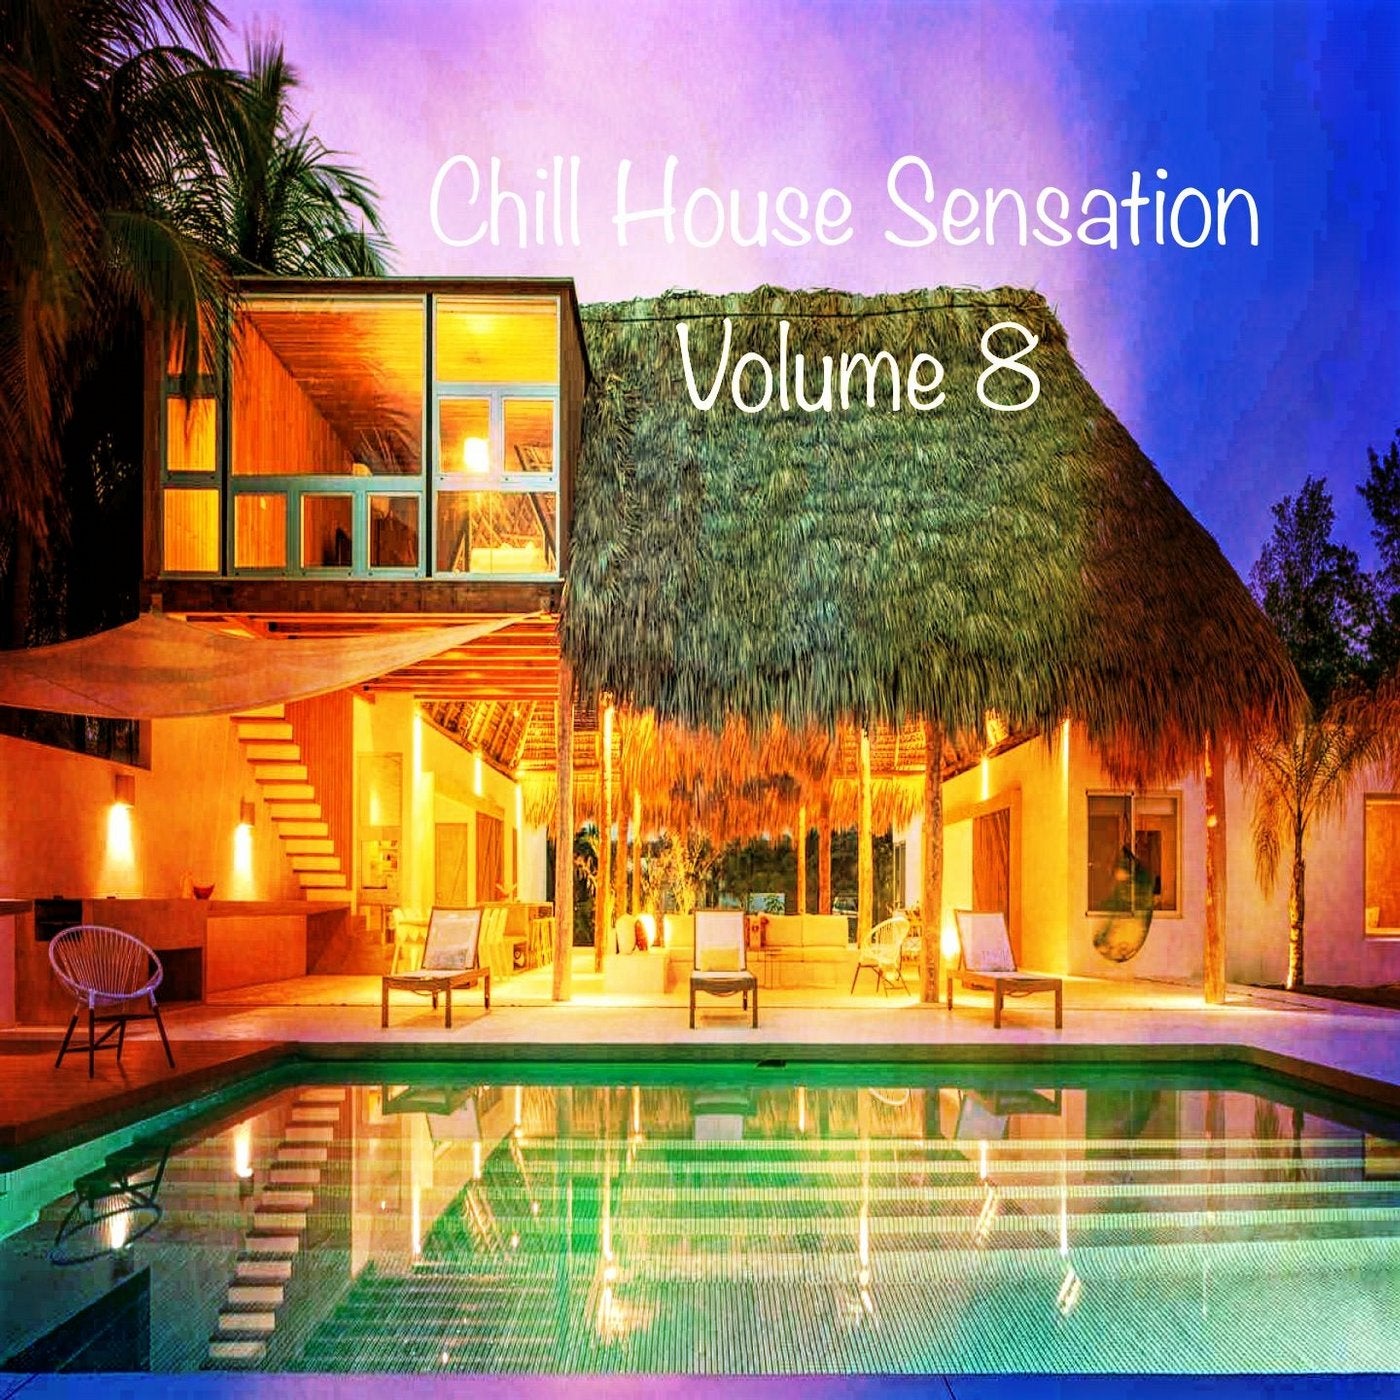 Chill House Sensation, Vol.8 (Best Selection of Lounge & Chill House Tracks)